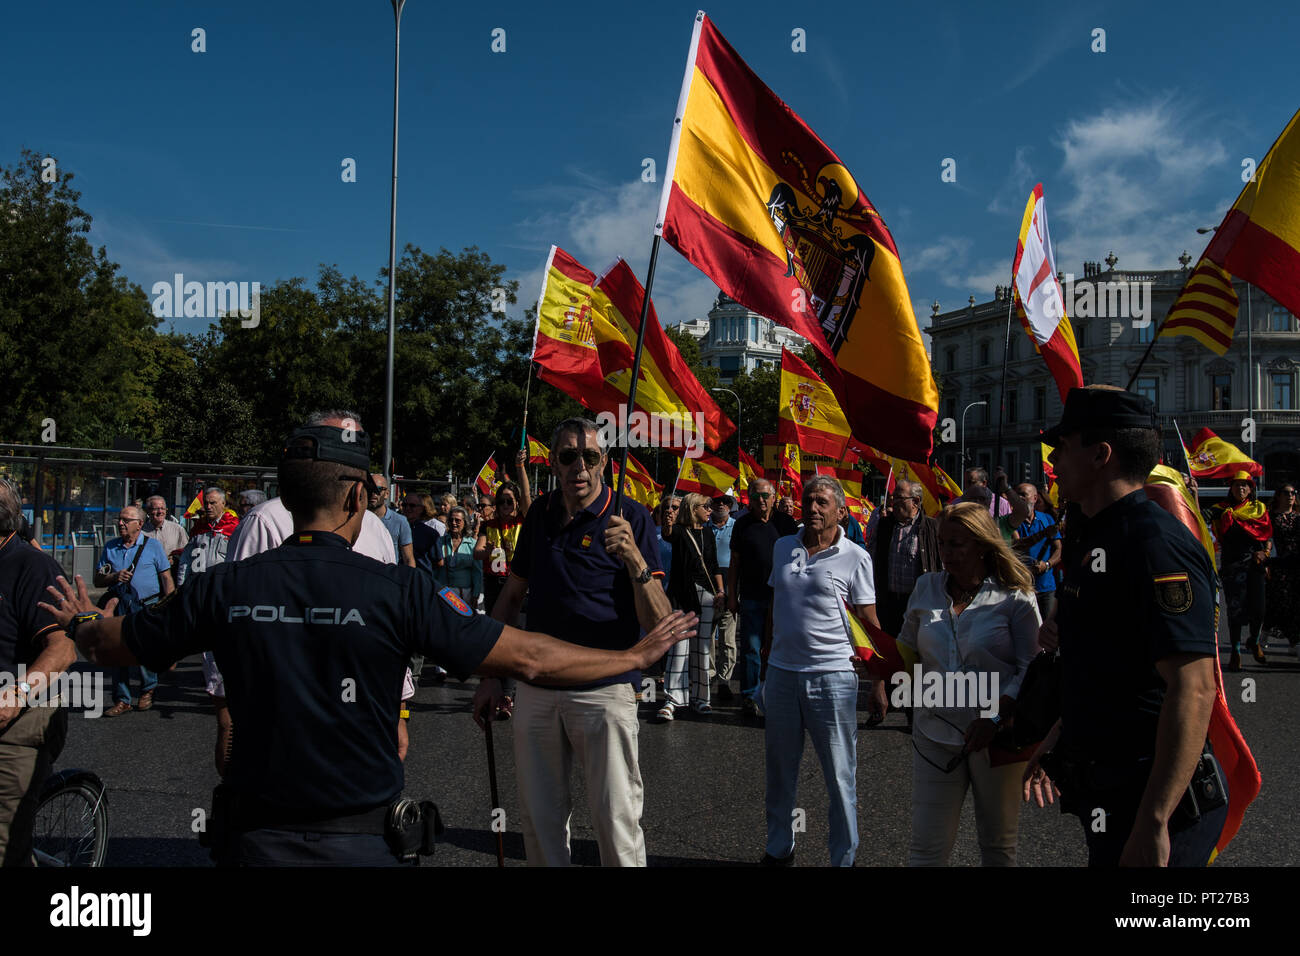 Madrid, Spain. 6th October, 2018. People carrying a francoist flag protesting during a demonstration demanding resignation of President Pedro Sanchez and calling for the union of Spain in the independence process of Catalonia, in Madrid, Spain. Credit: Marcos del Mazo/Alamy Live News Stock Photo